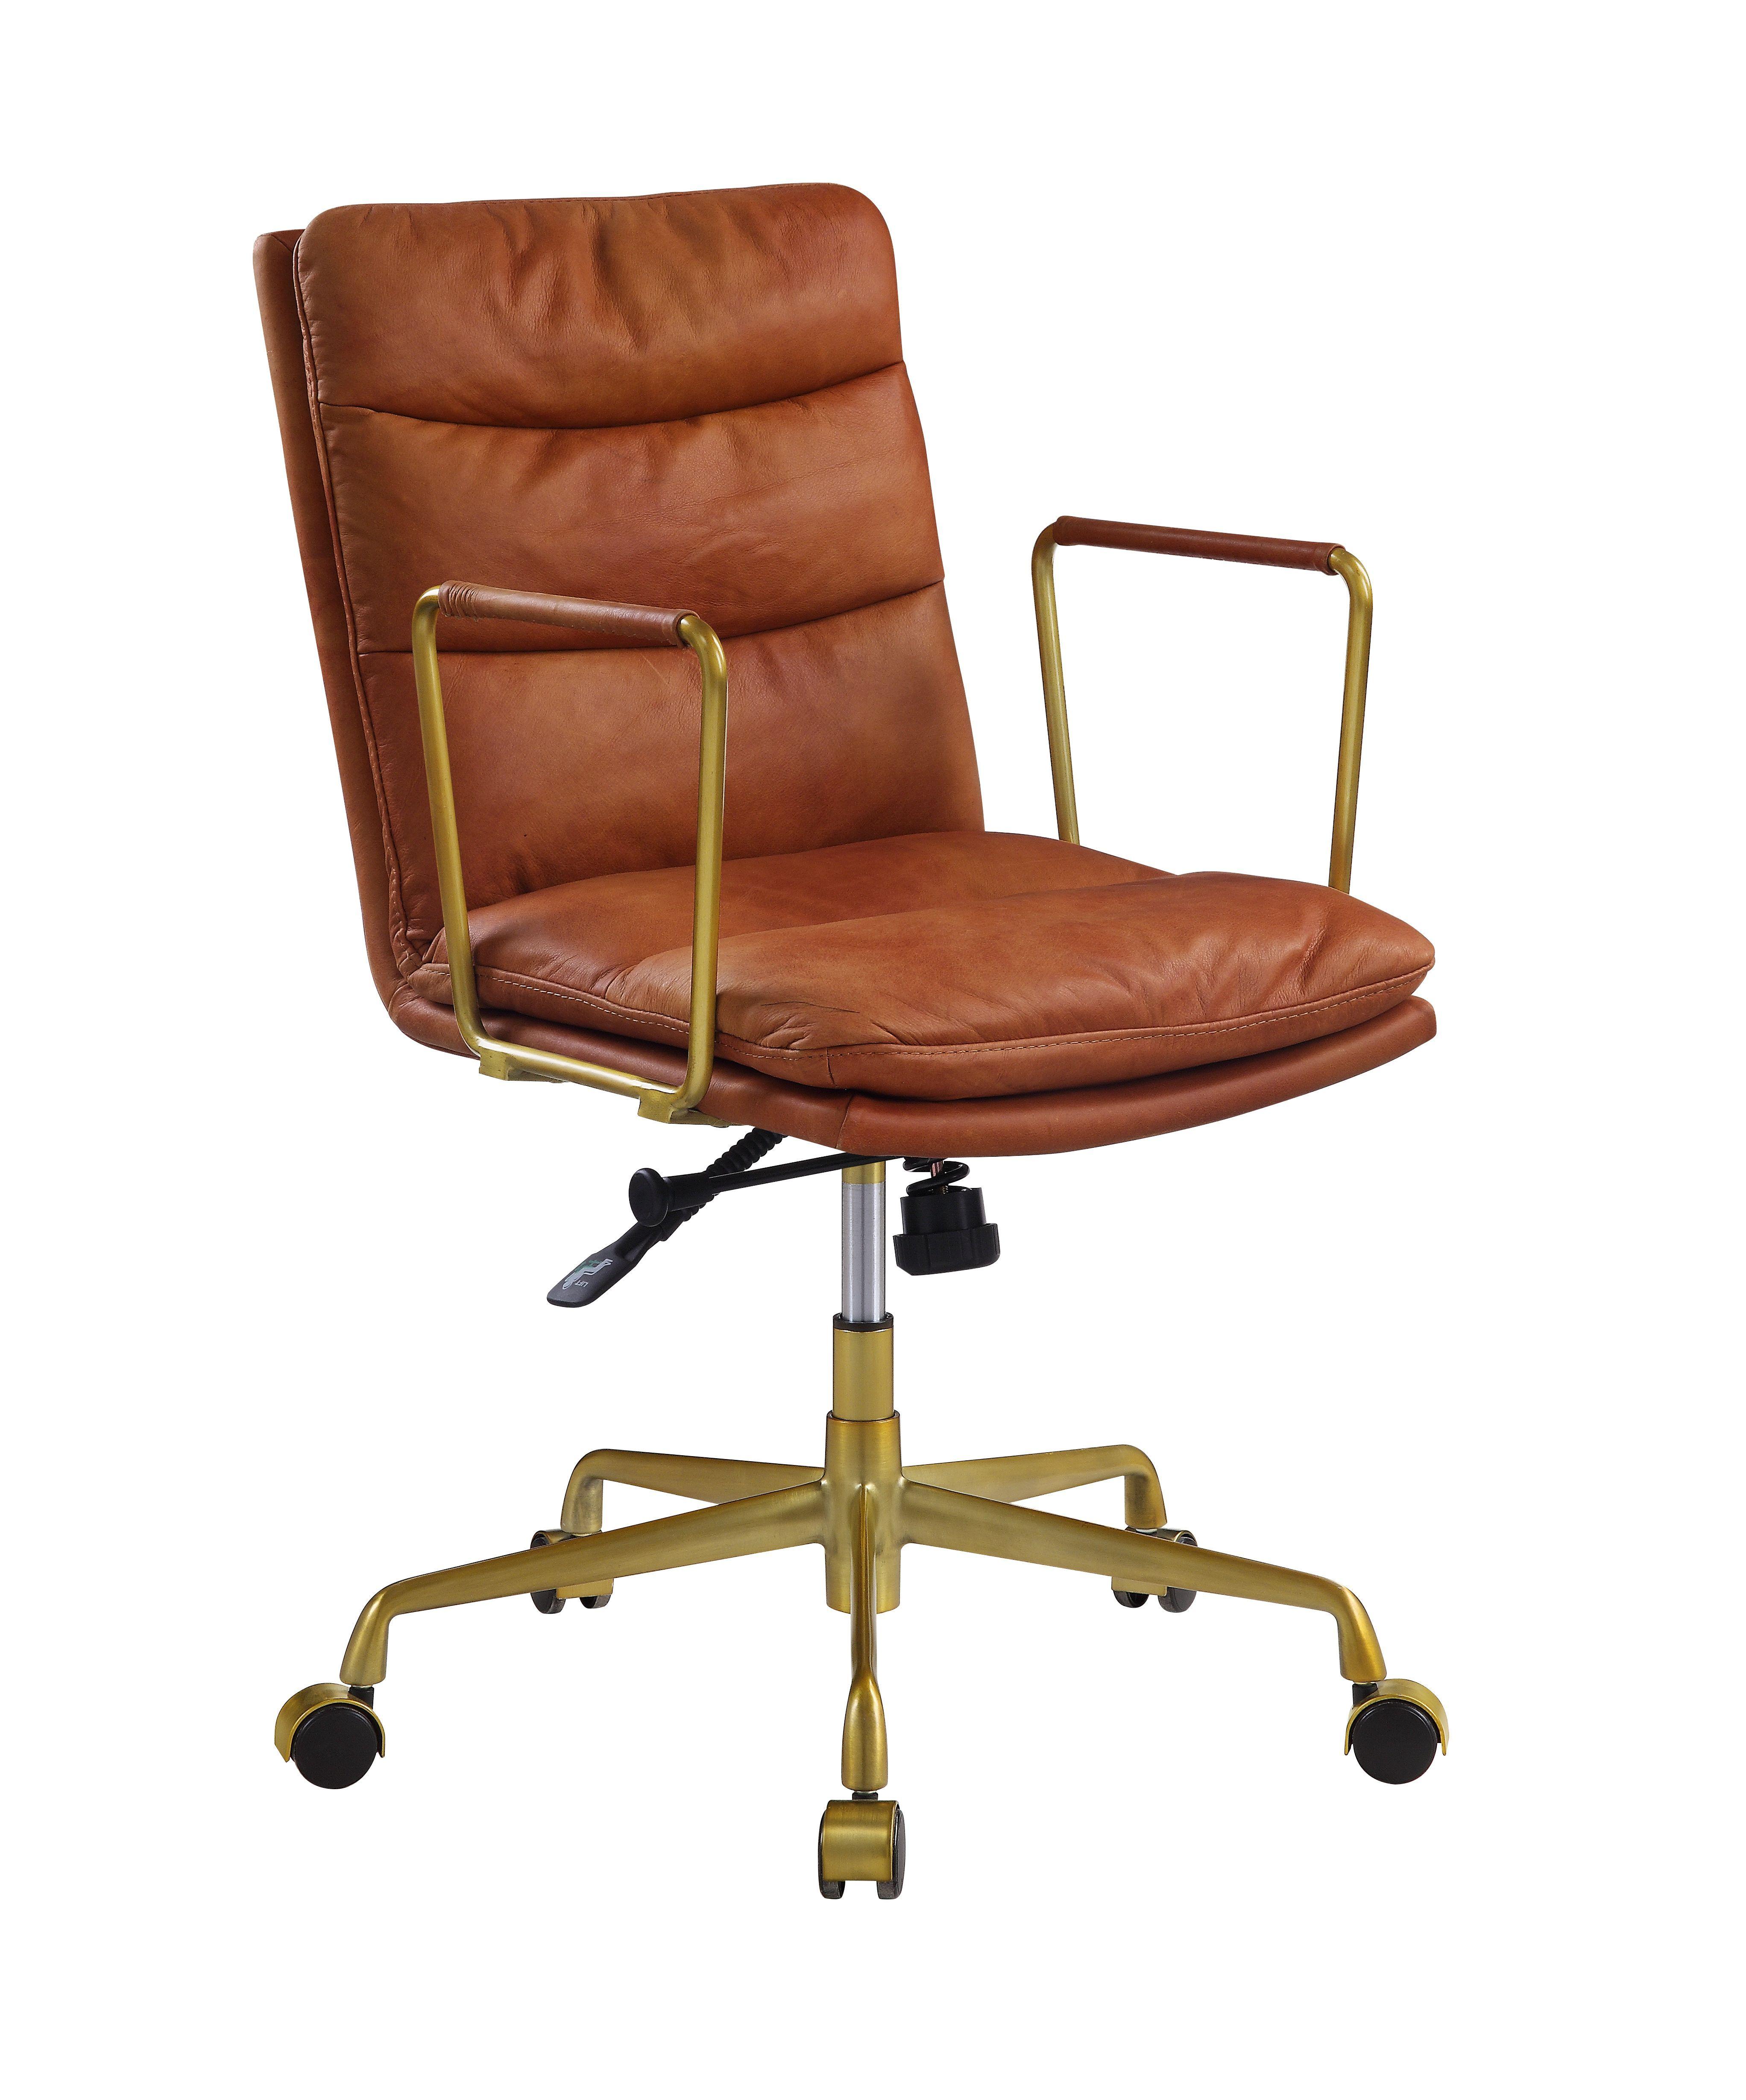 Modern Office Chair Dudley 92498 in Brown Top grain leather